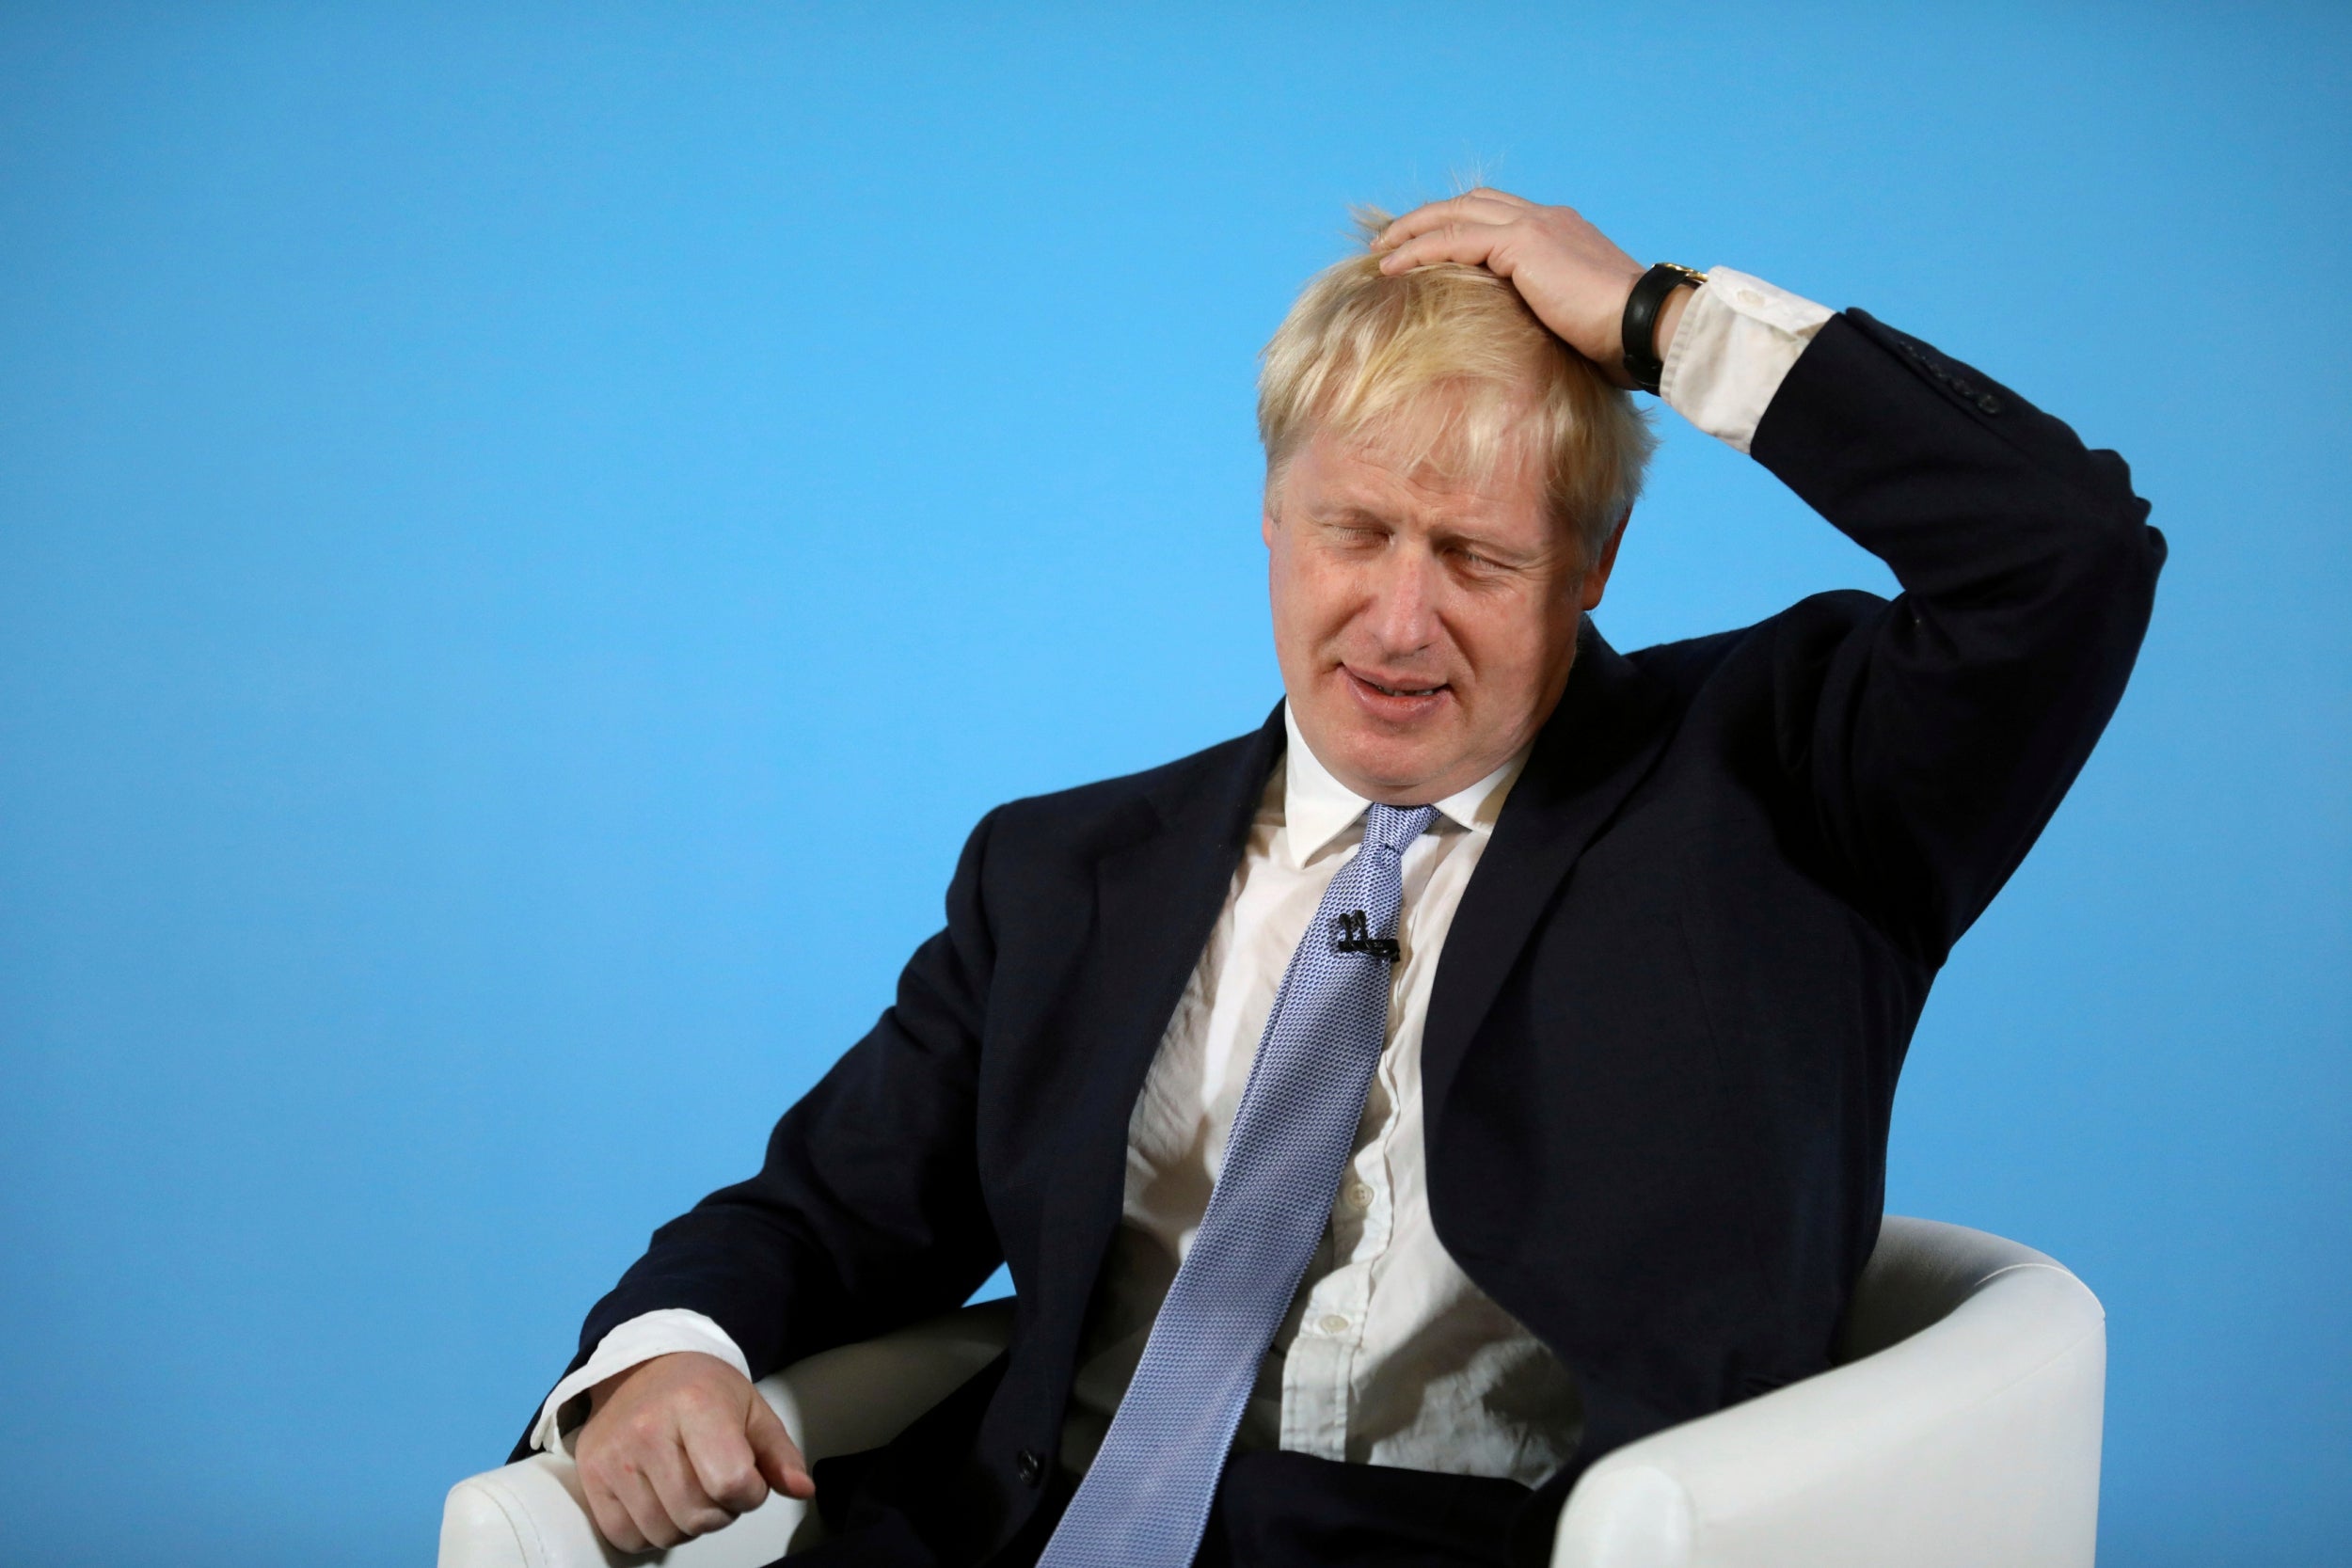 Johnson has put the promise to take Britain out of the EU with or without a deal by 31 October at the heart of his campaign (Reuters)